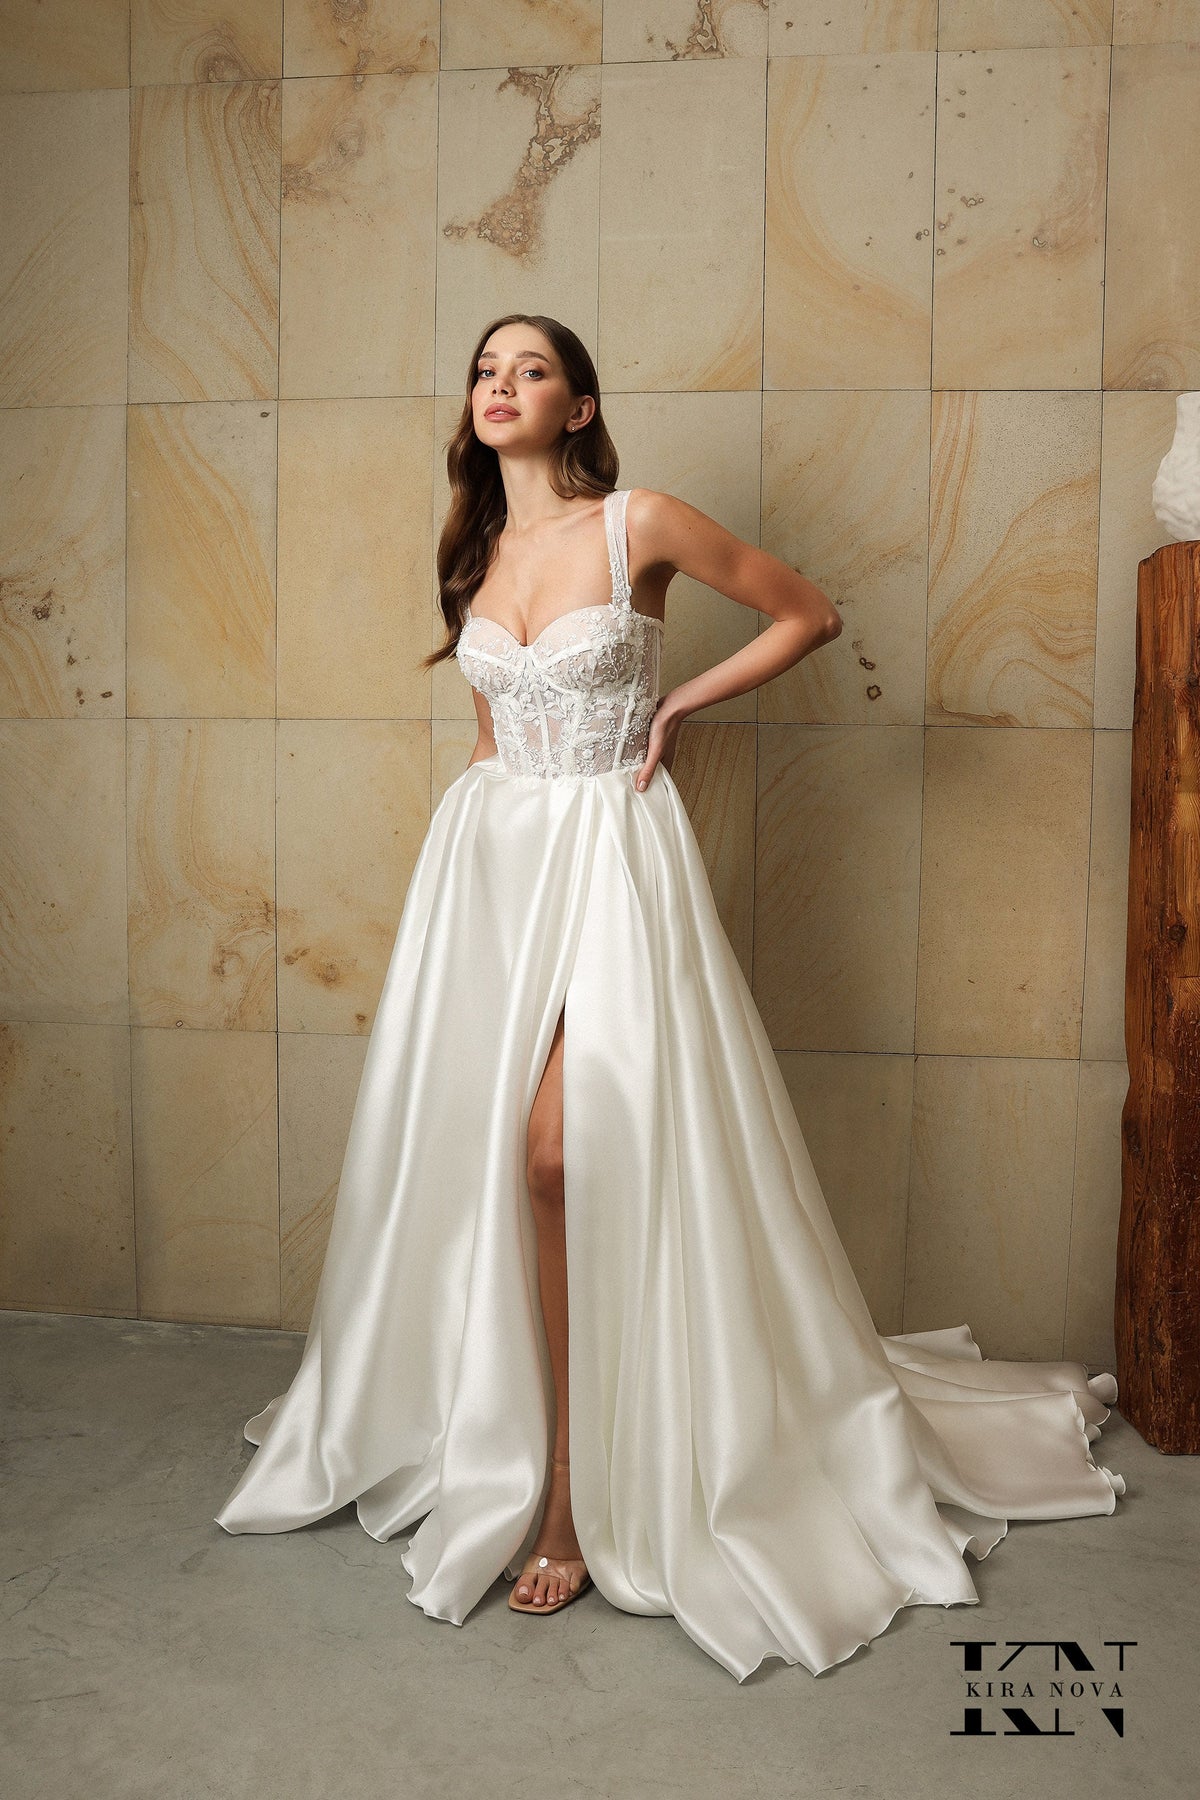 Modern Sleeveless with Thick Straps Wedding Dress Bridal Gown Aline With Train Sweetheart Neckline Floral Lace Satin Skirt Bustier Side Slit